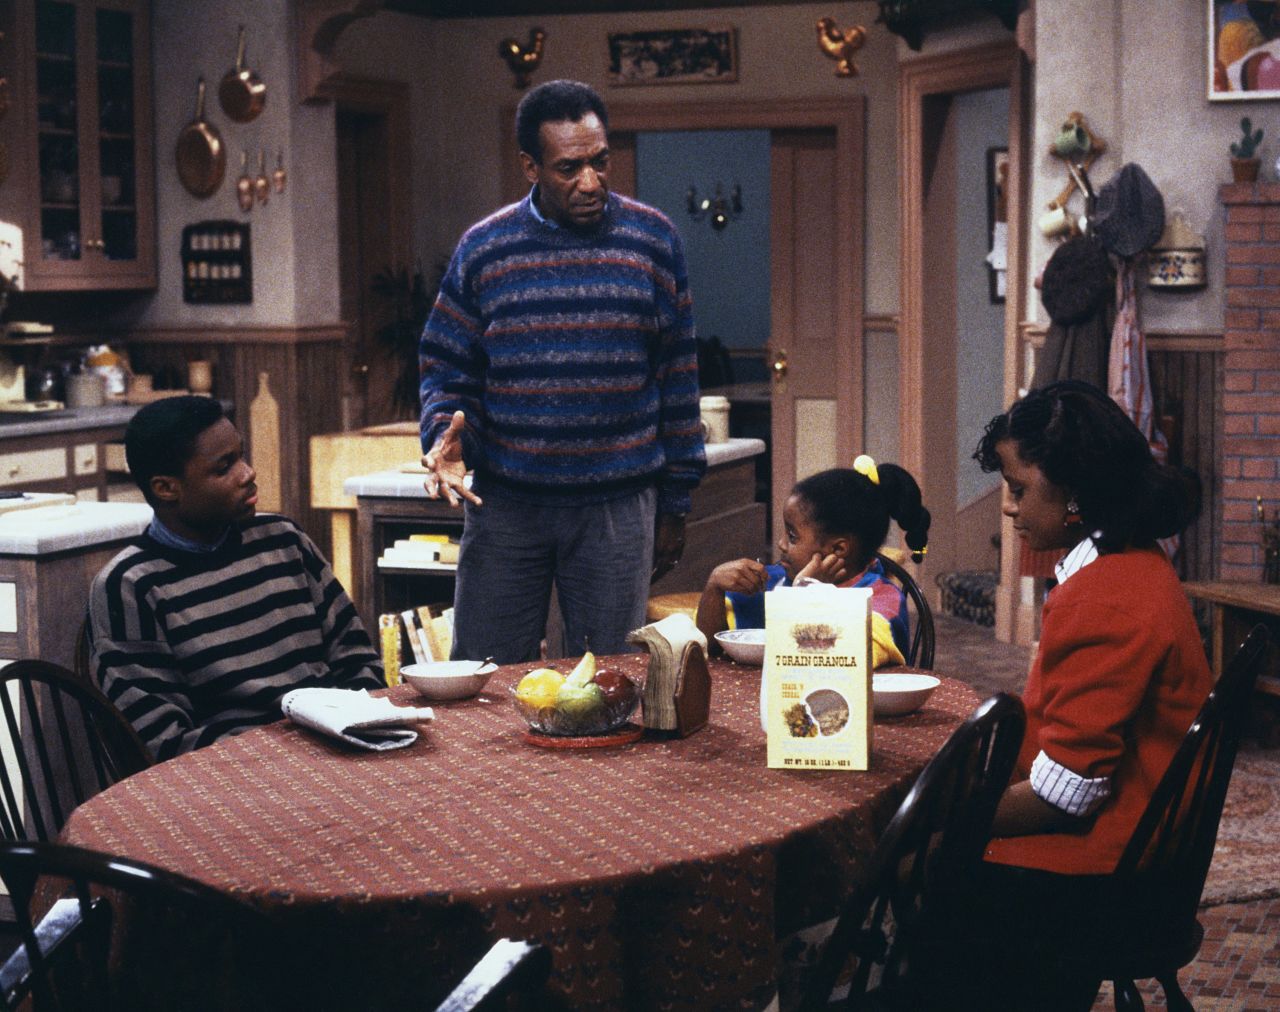 "The Cosby Show" finale came full circle as Theo -- struggling with school in the series premiere -- graduated college. It was great to see Bill Cosby and Phylicia Rashad hold hands and get one last round of applause from the studio audience.